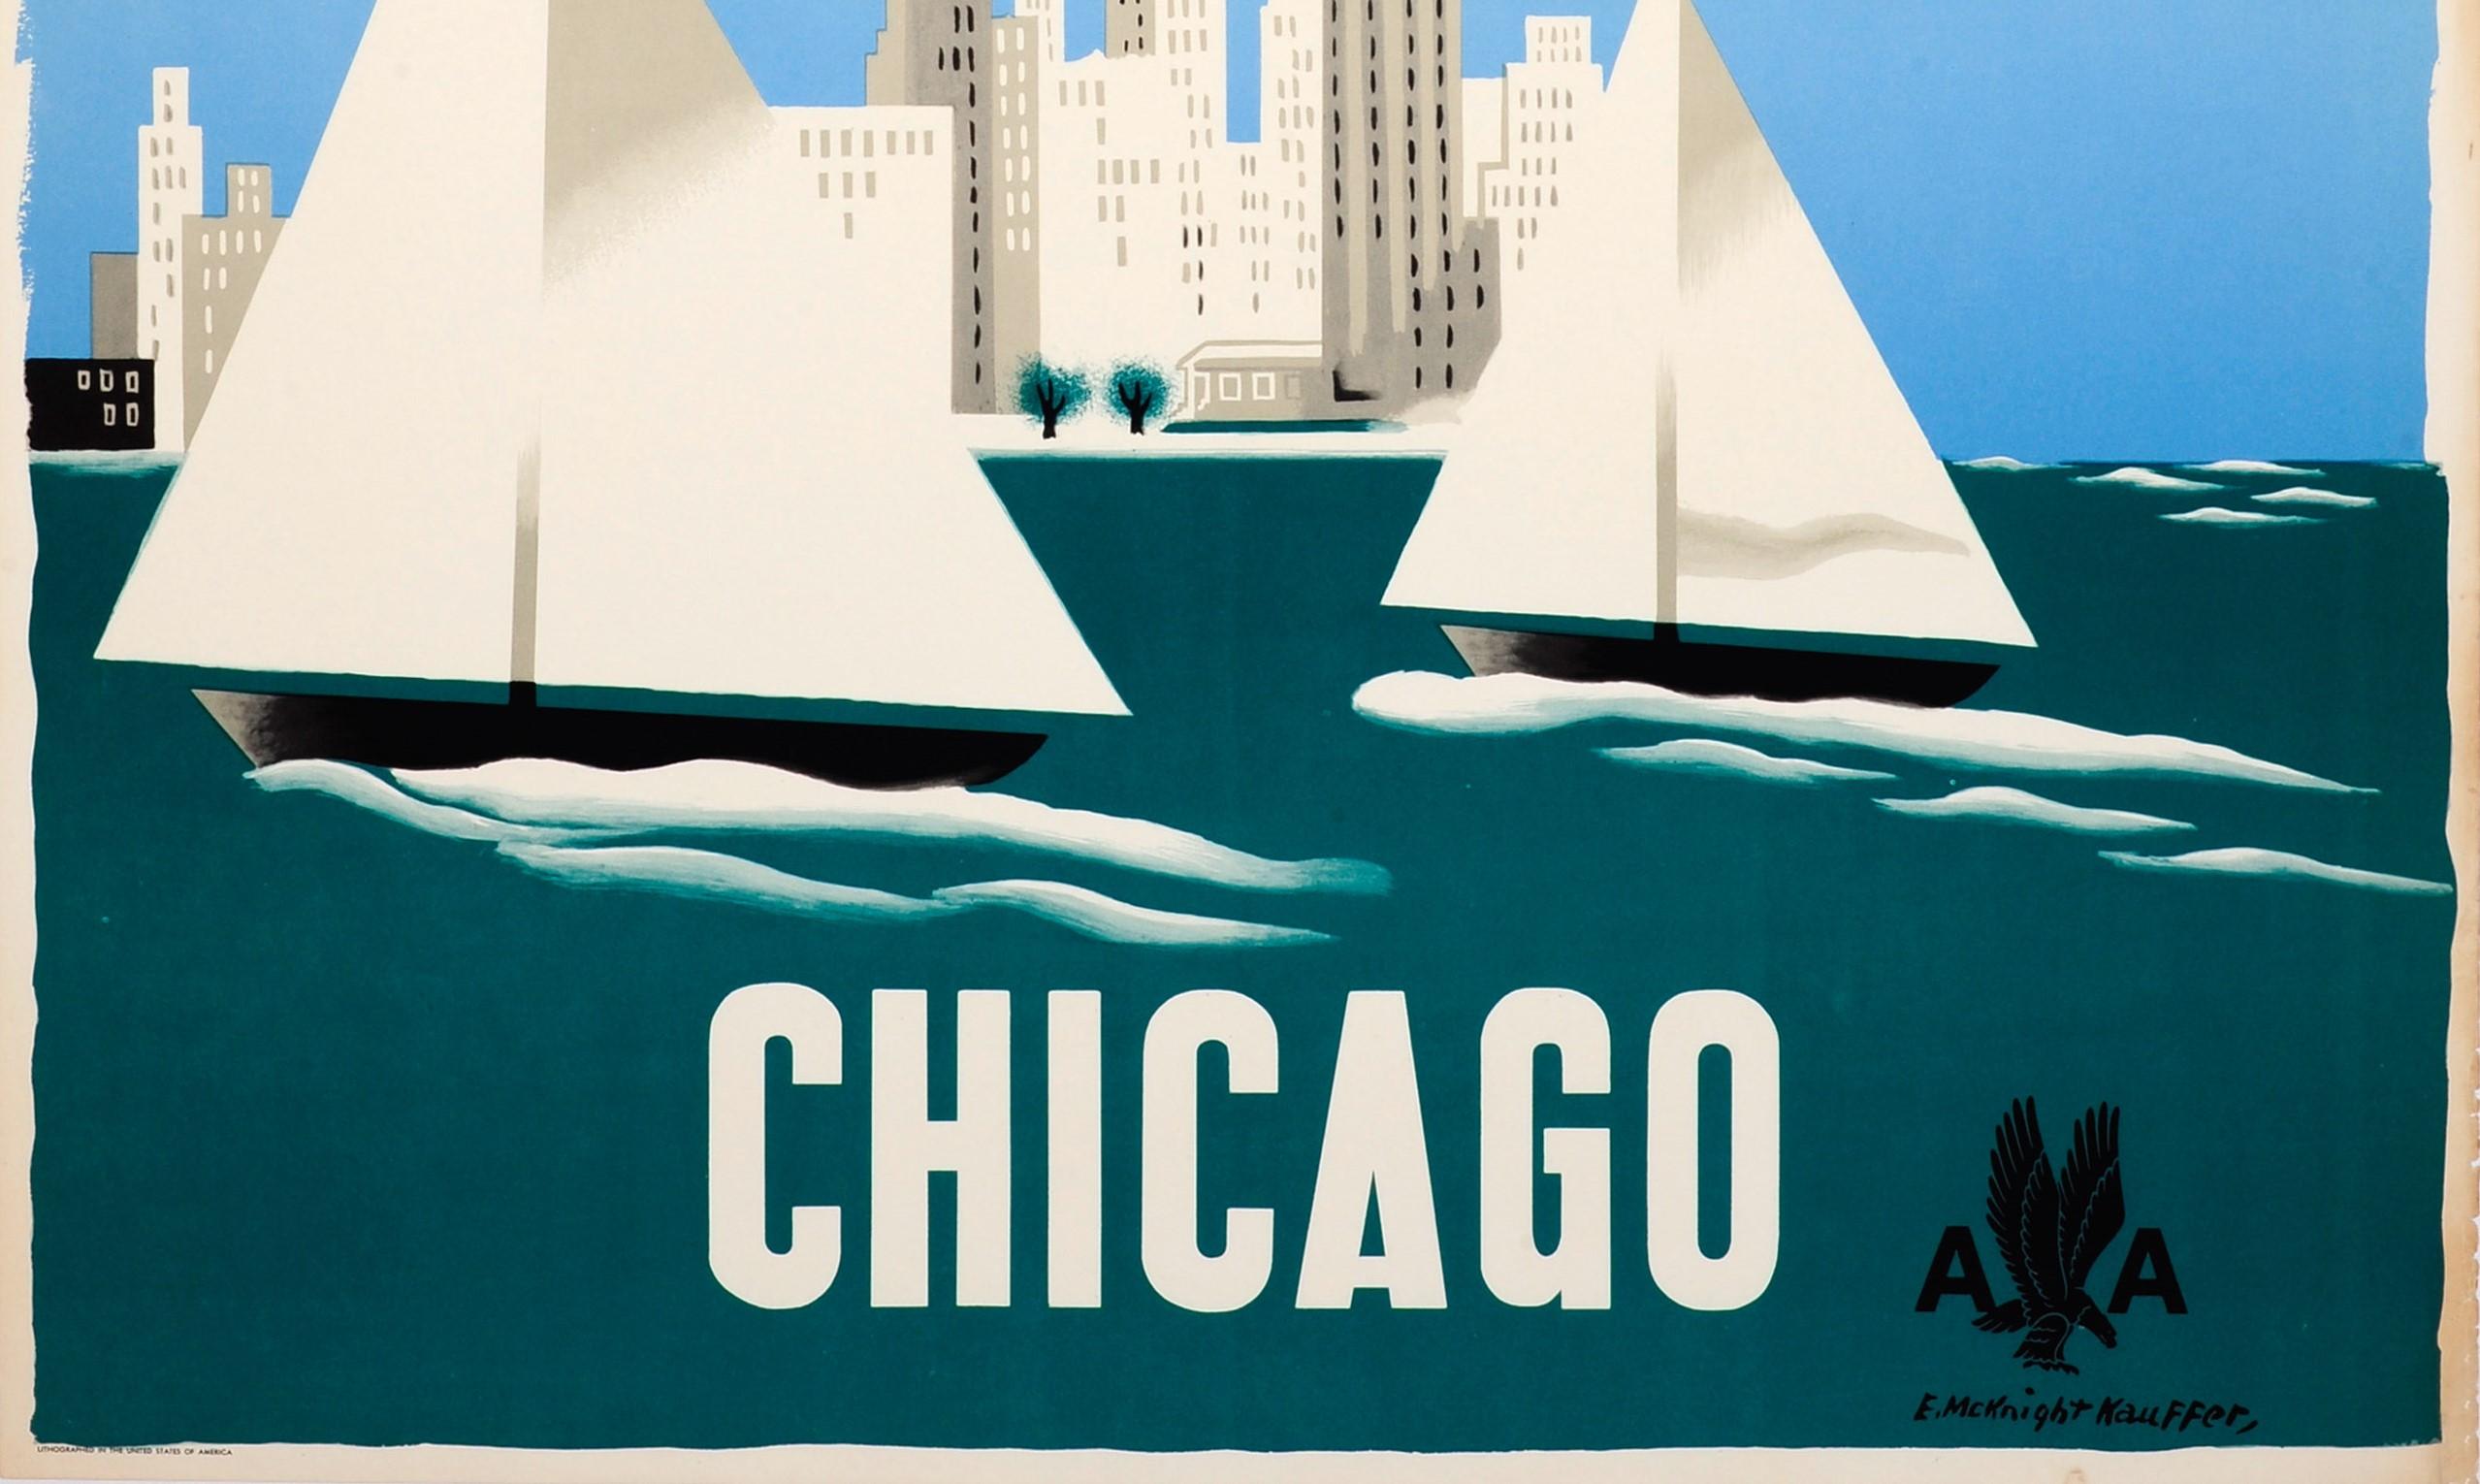 Mid-20th Century Original Vintage Travel Poster American Airlines to Chicago Ft Sailing City View